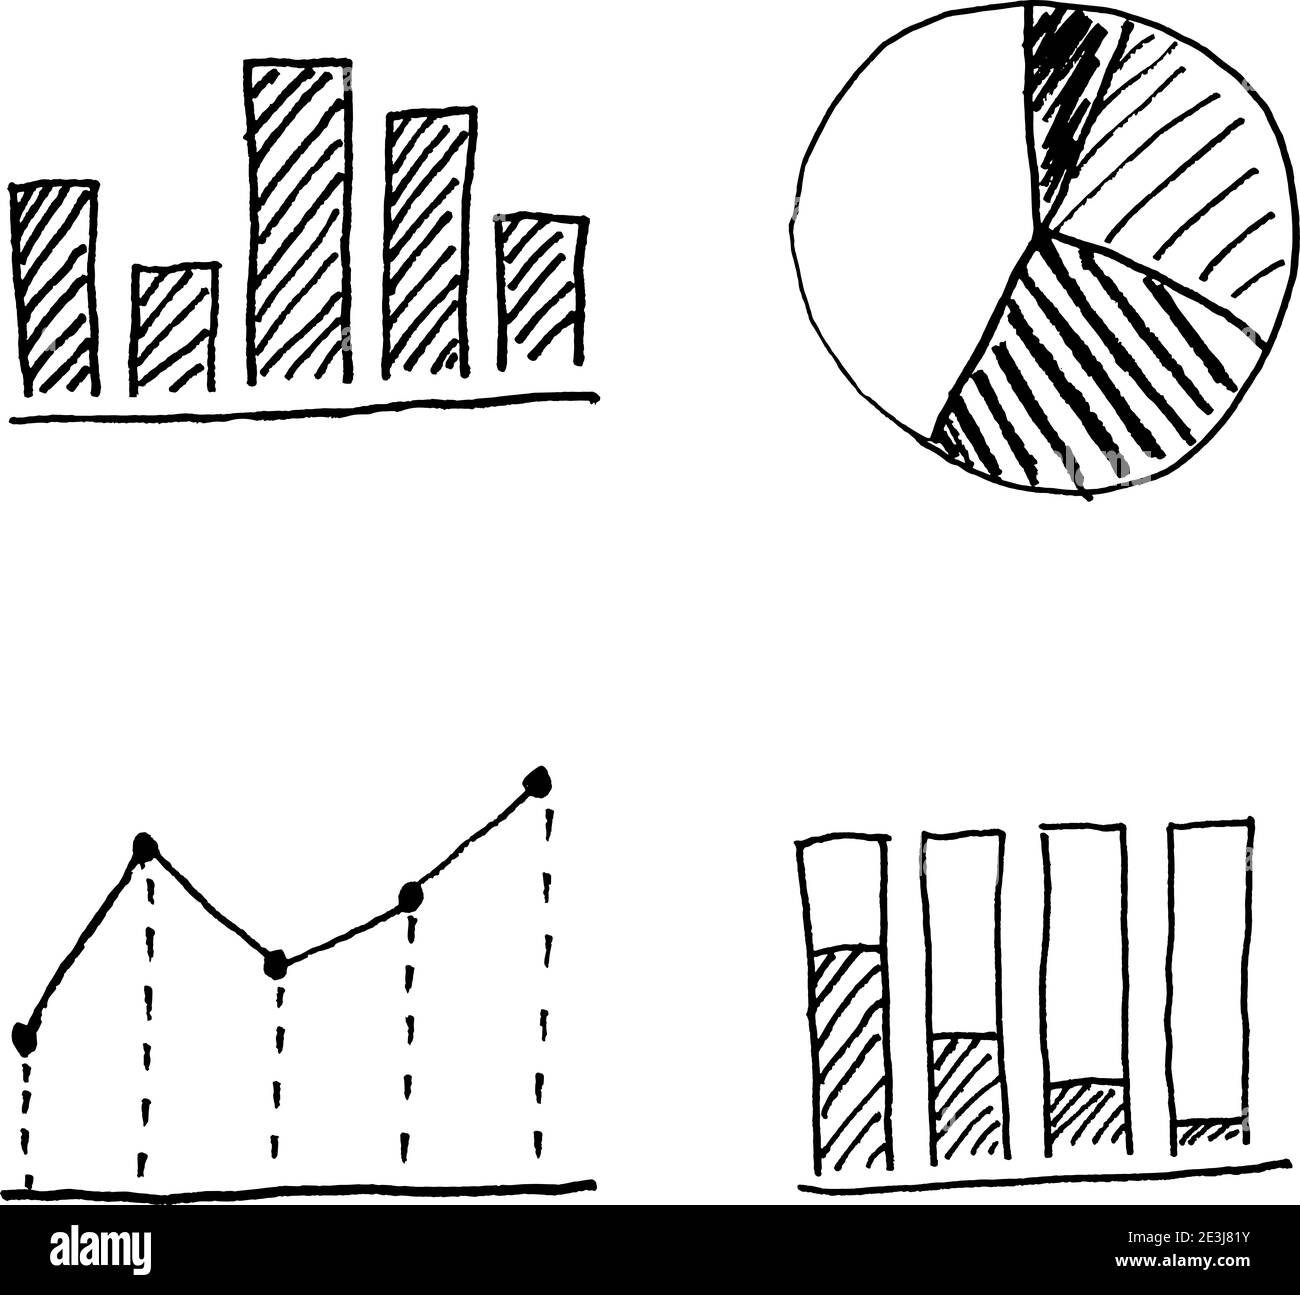 drawing bar chart, line chart and pie chart Stock Photo